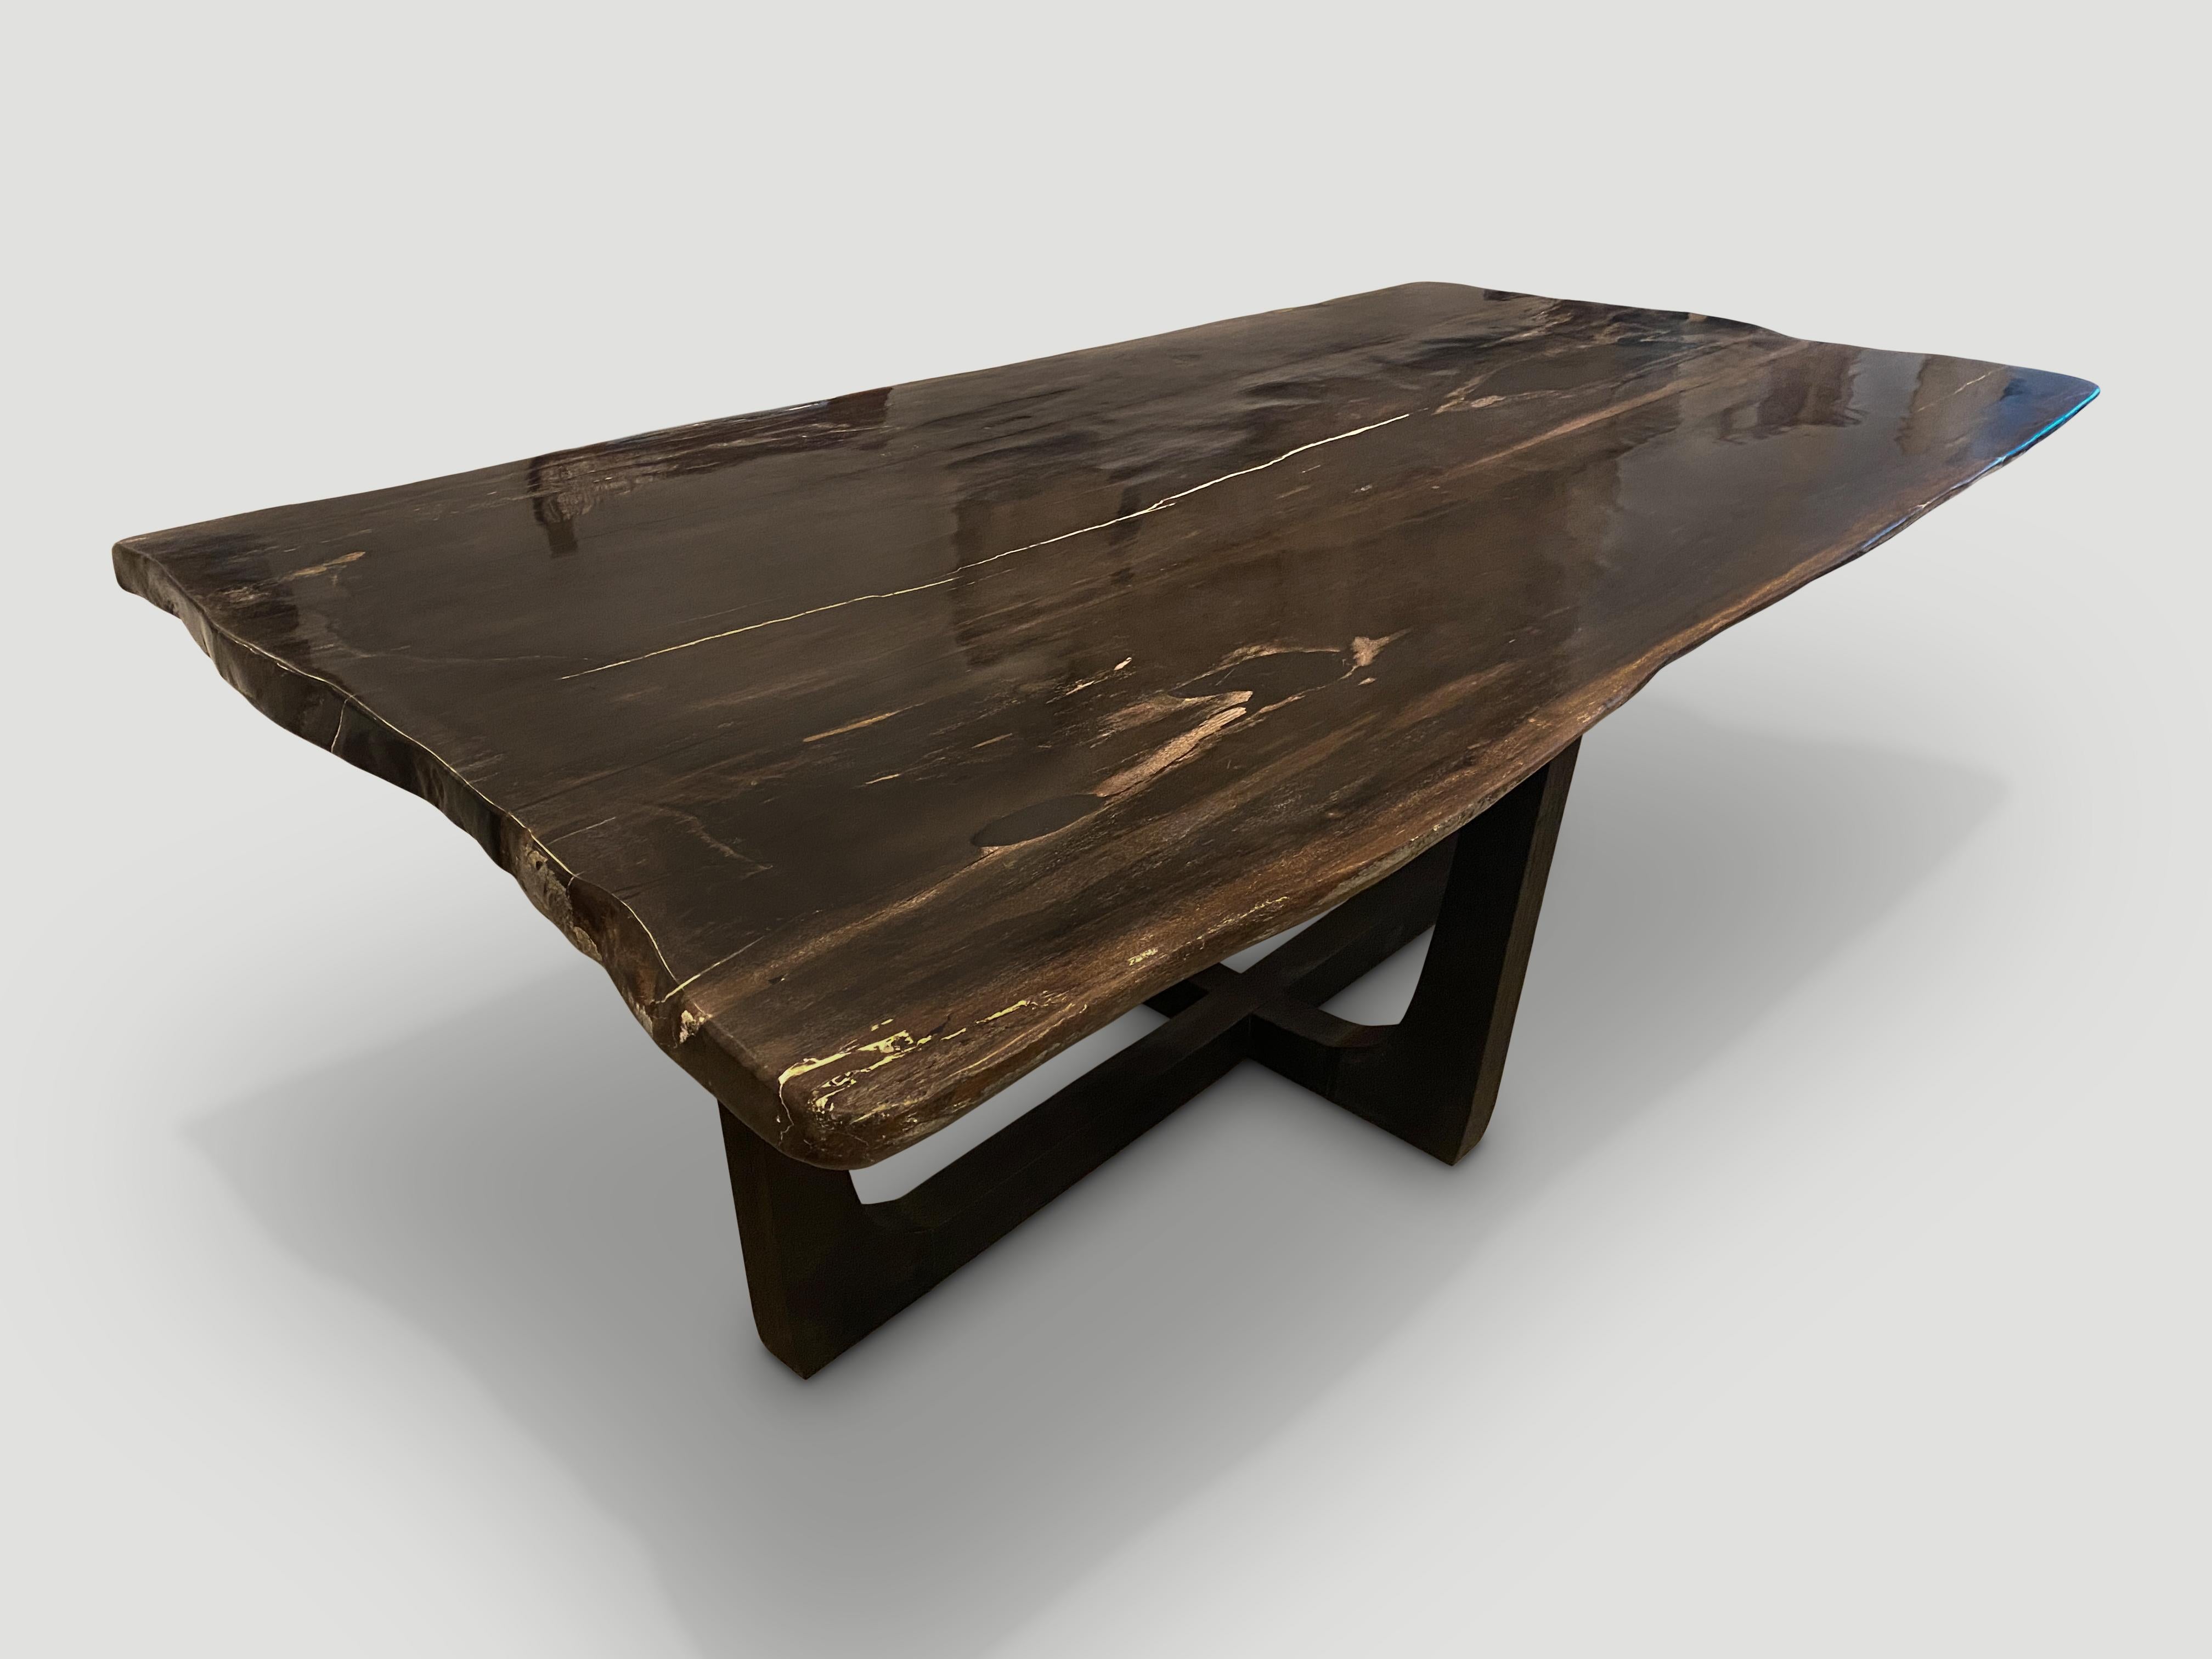 Organic Modern Andrianna Shamaris Live Edge Super Smooth Petrified Wood Dining Table For Sale